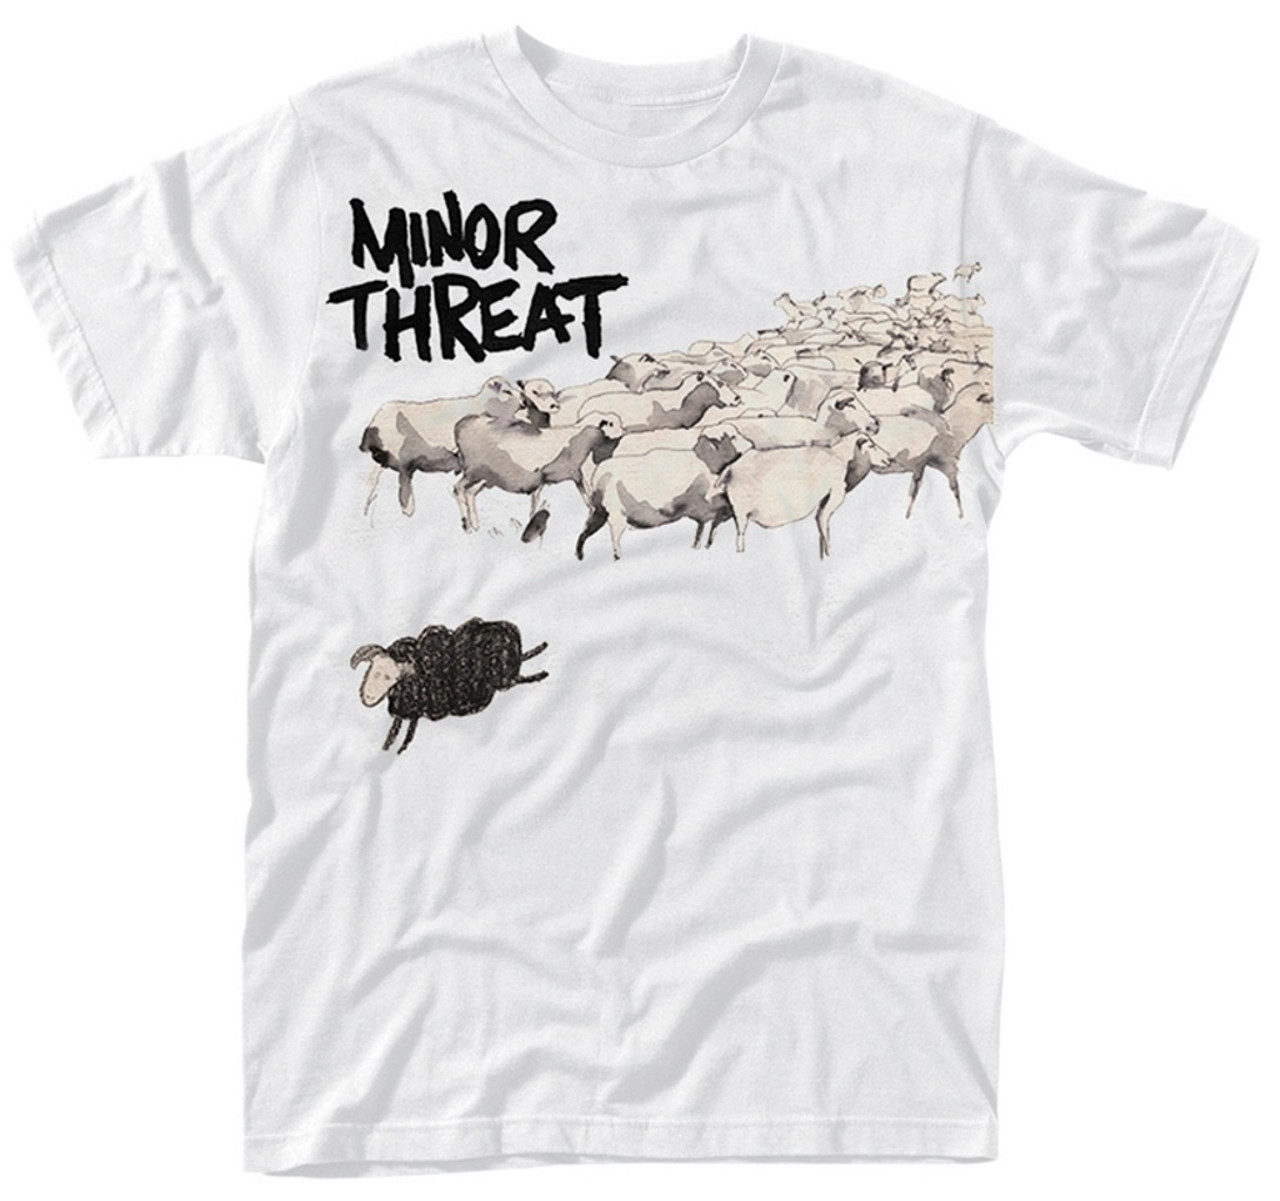 Minor Threat 'Out Of Step' T-Shirt